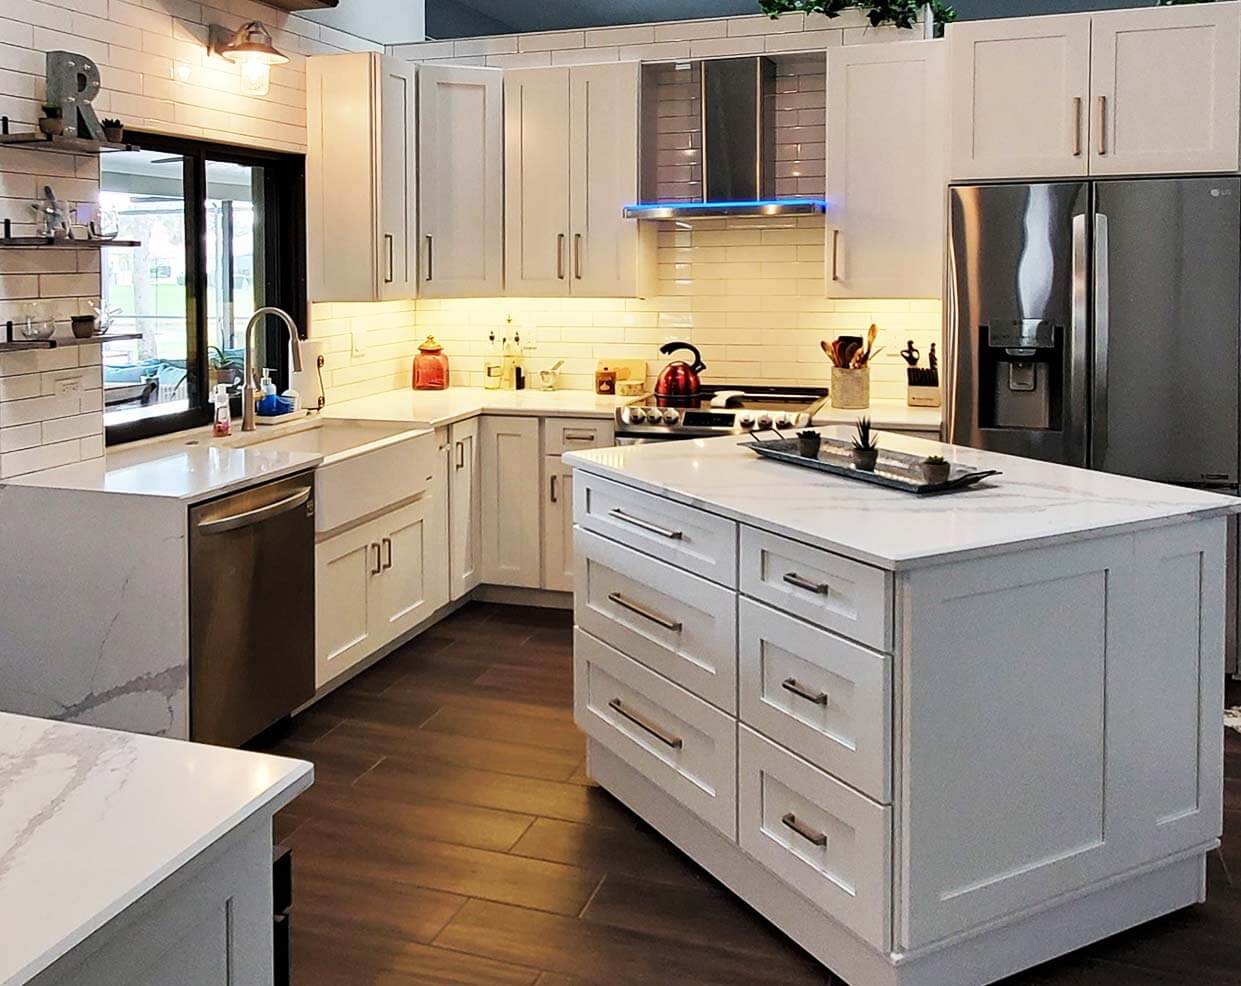 Discount Kitchen Cabinets Online   RTA Cabinets   CabinetSelect.com